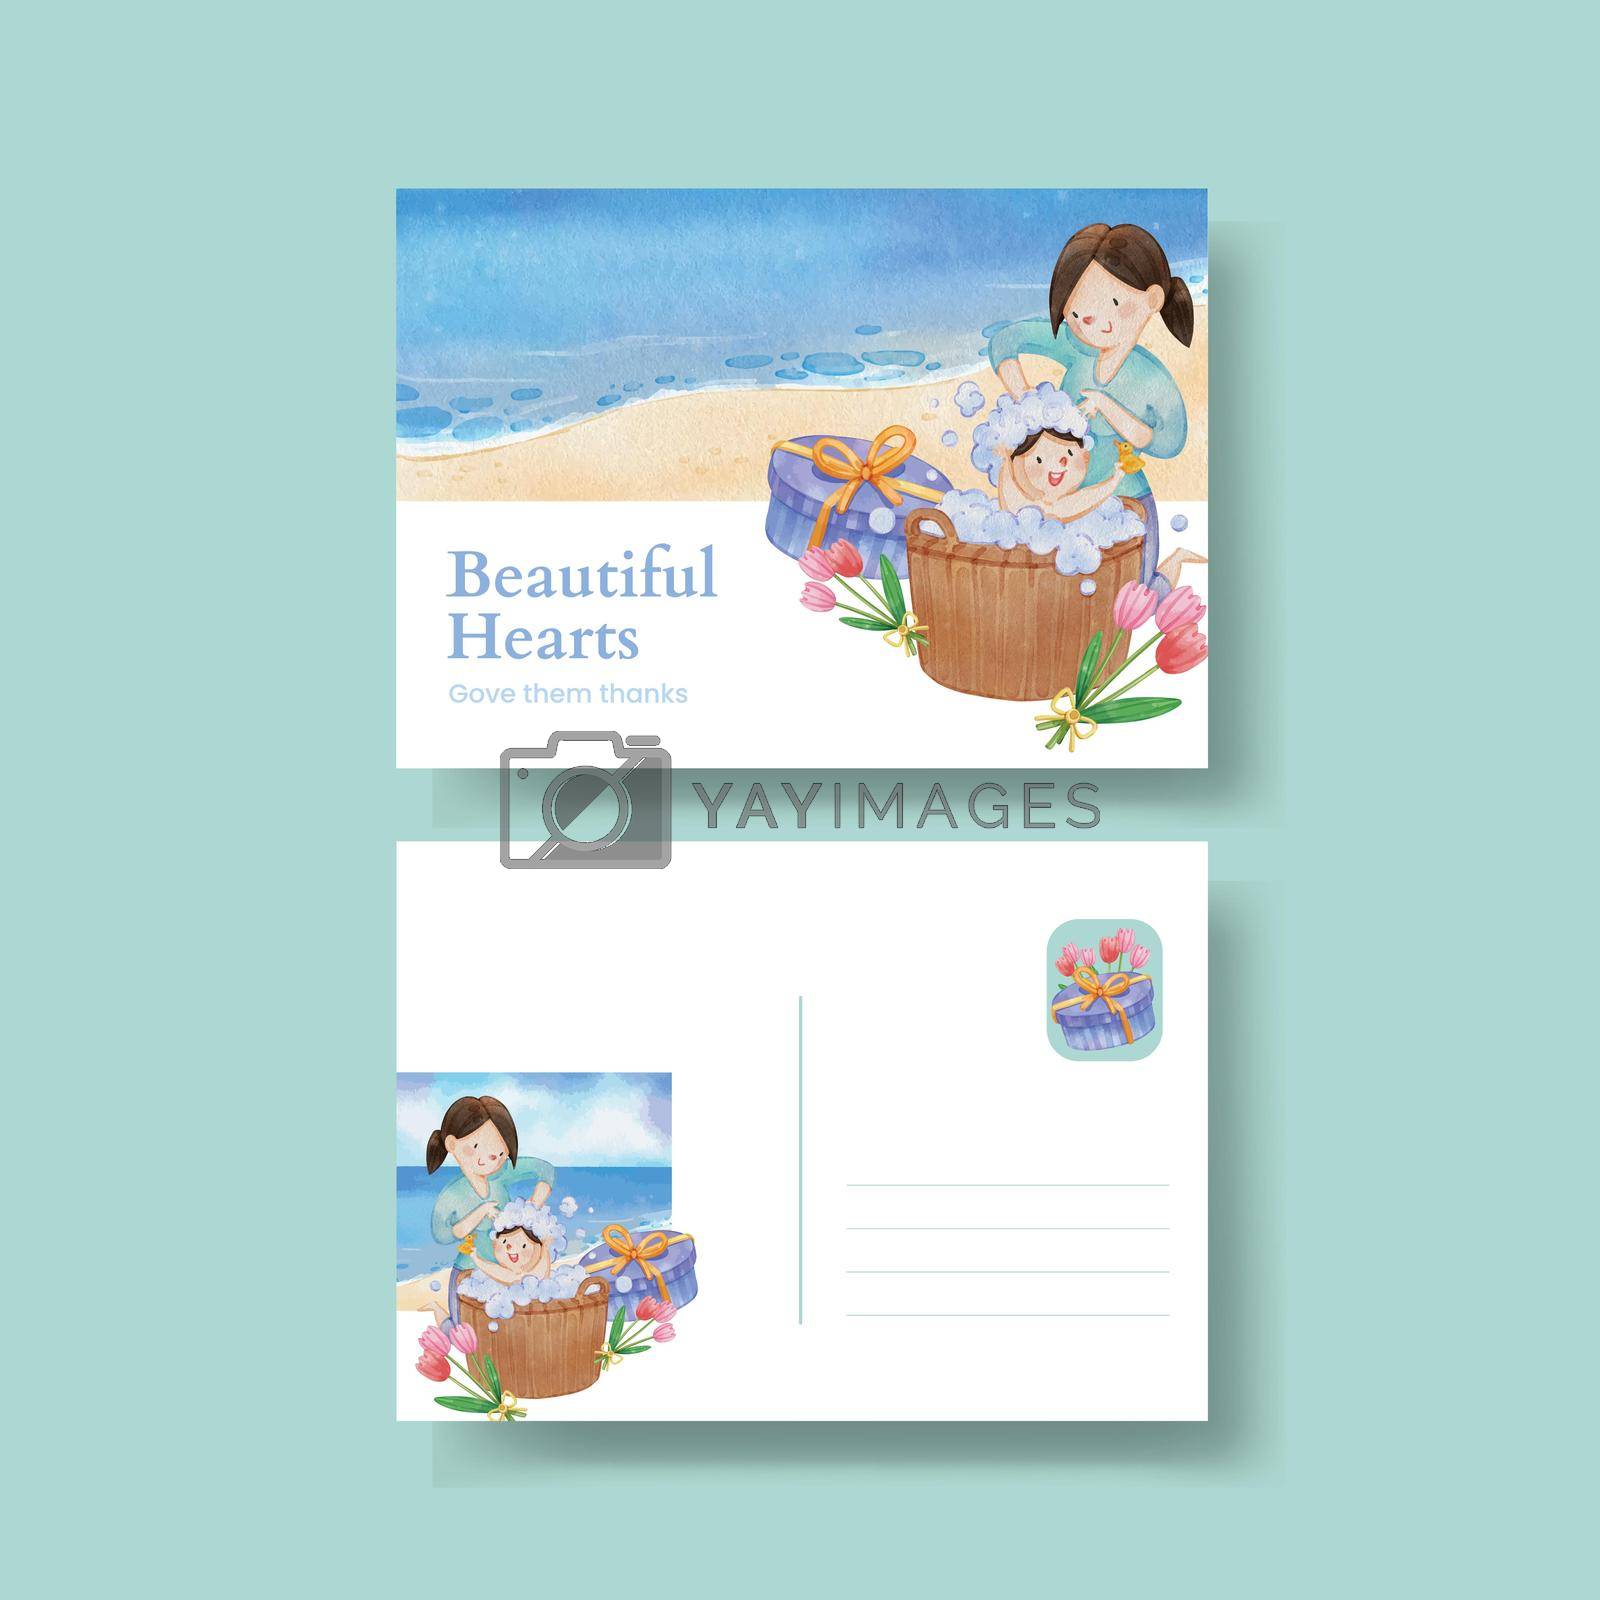 Royalty free image of Postcard template with love supermom concept,watercolor style by Photographeeasia